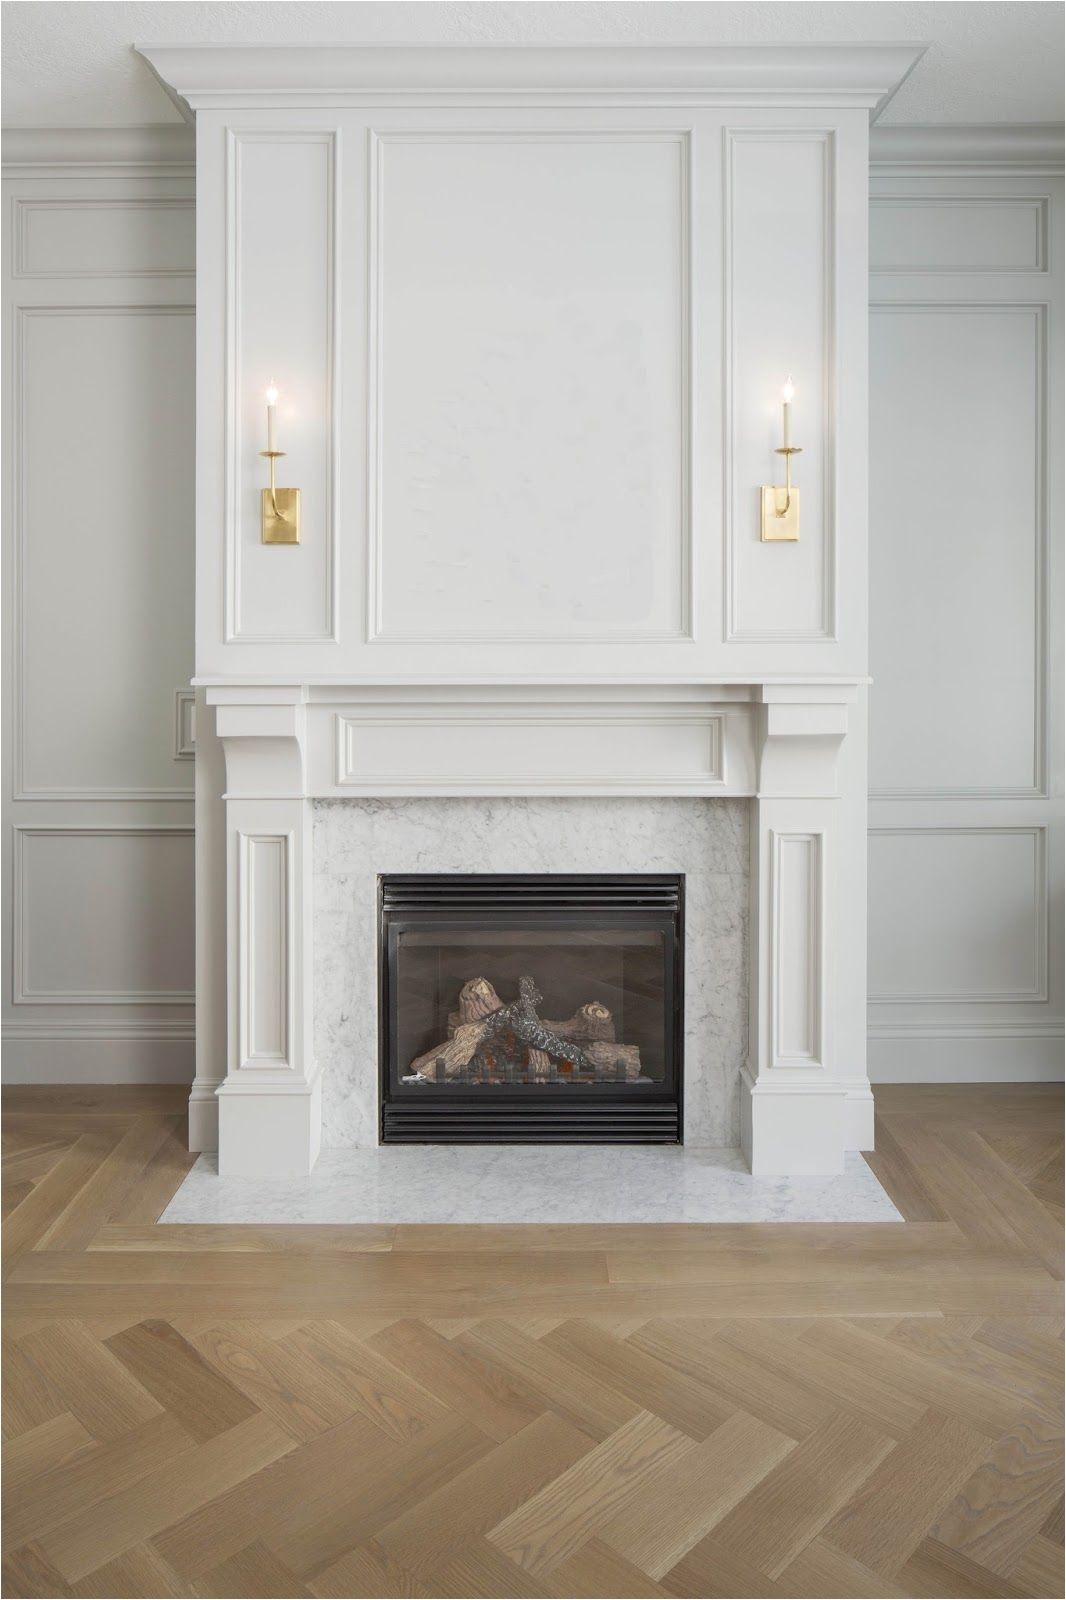 Can You Use Quartz for Fireplace Surround Herringbone Floors Marble and Wainscotting Home Inspiration